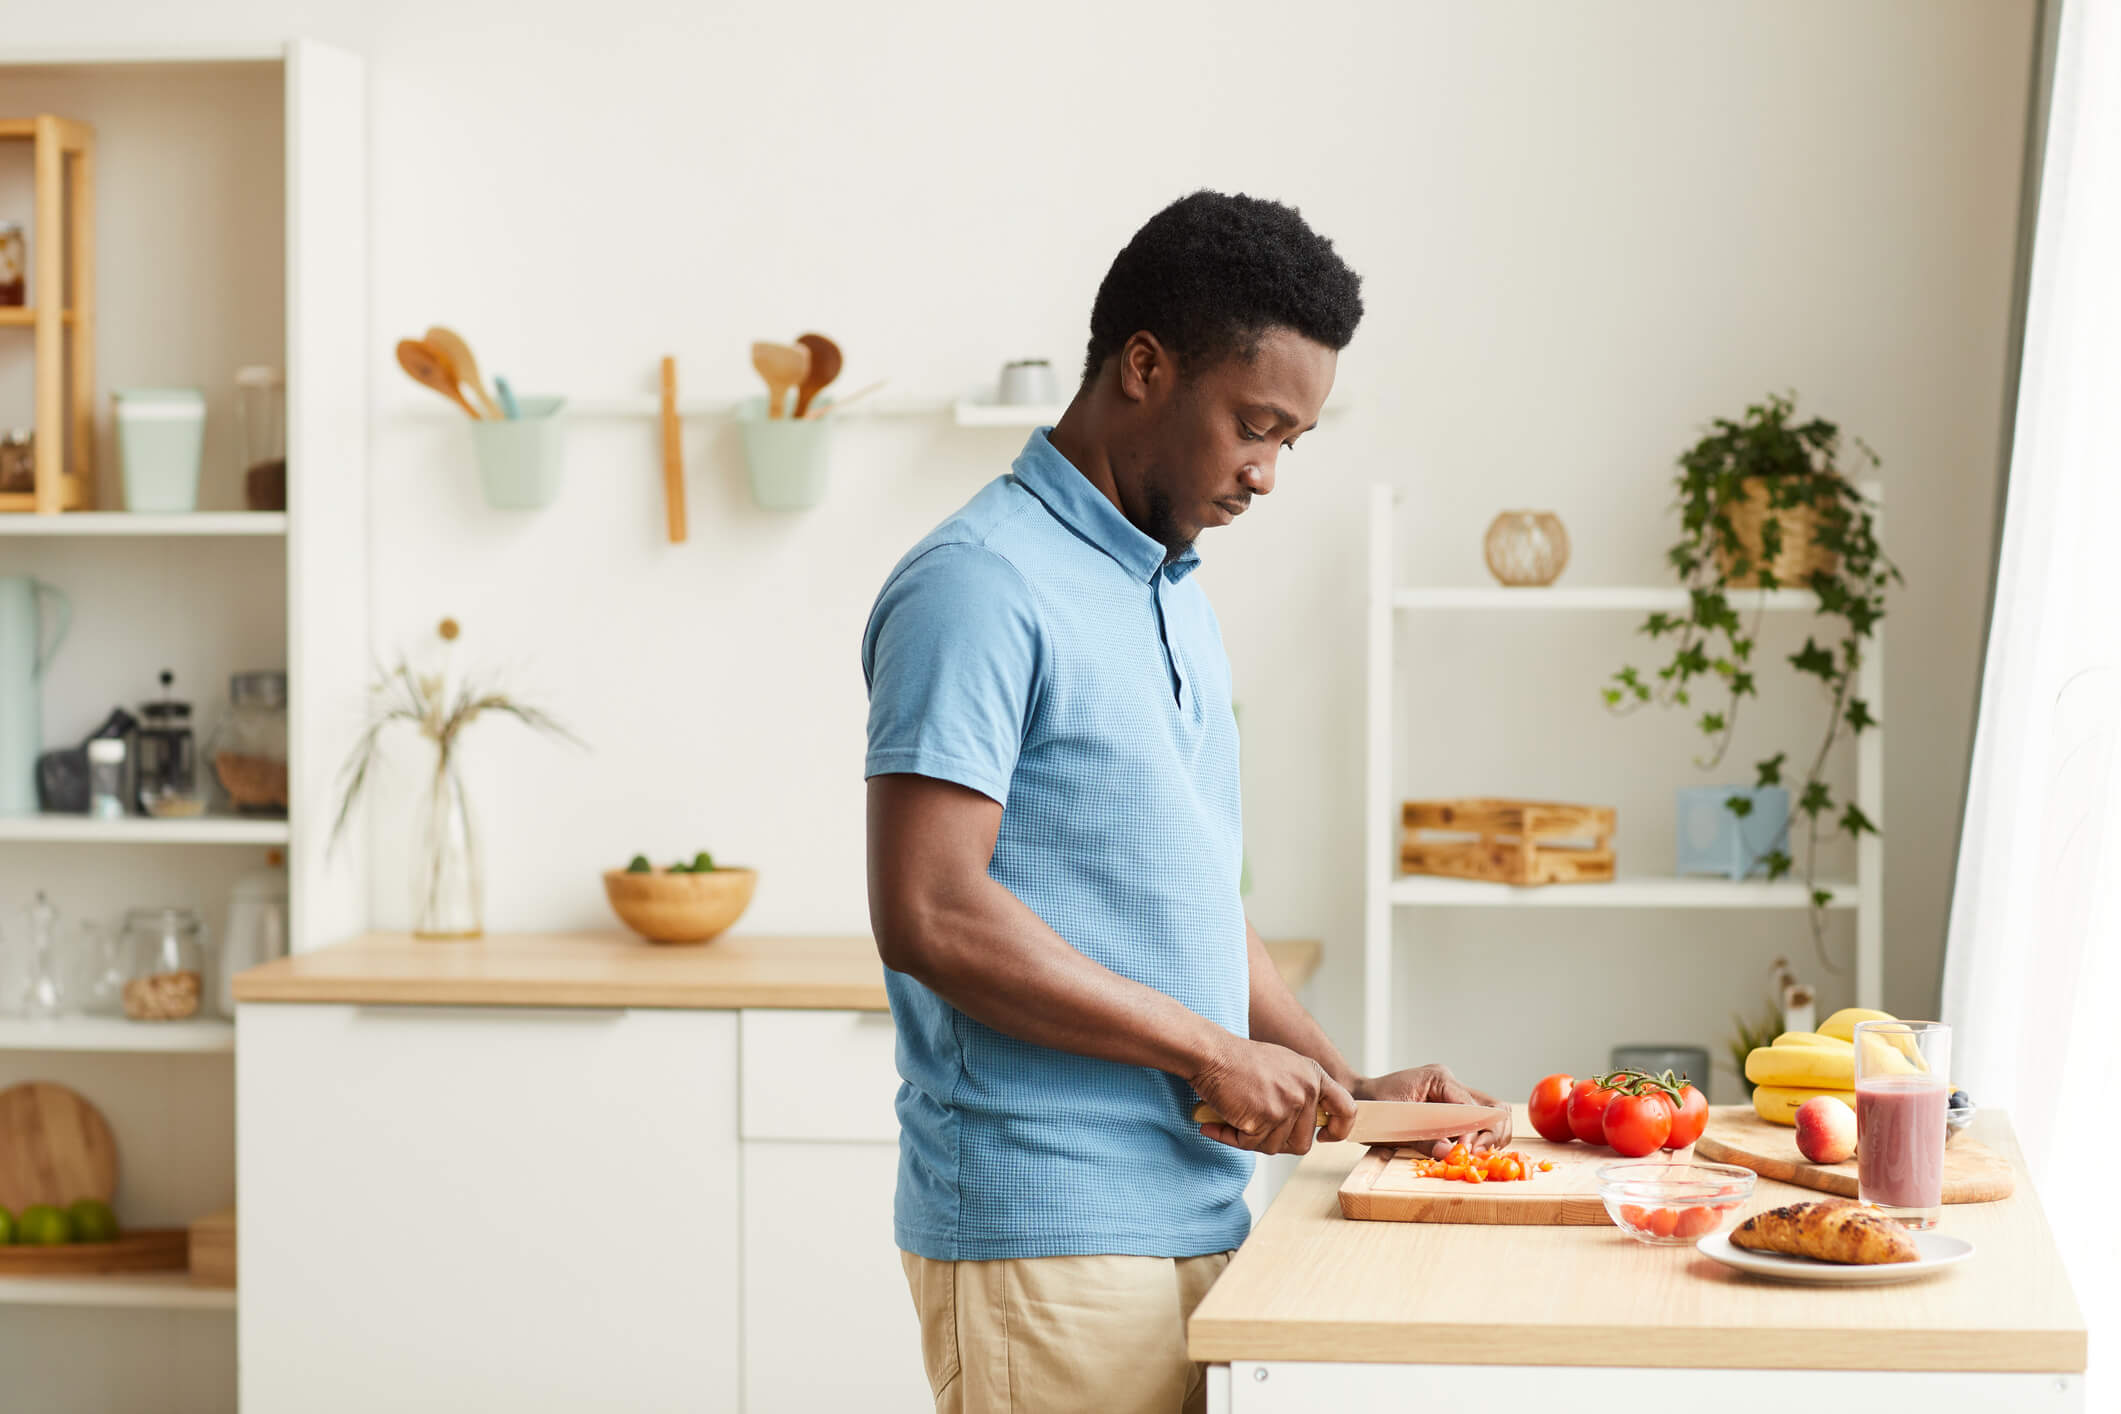 A man wearing a blue collared shirt is standing in front of the kitchen counter and chopping tomatoes with a focused expression.